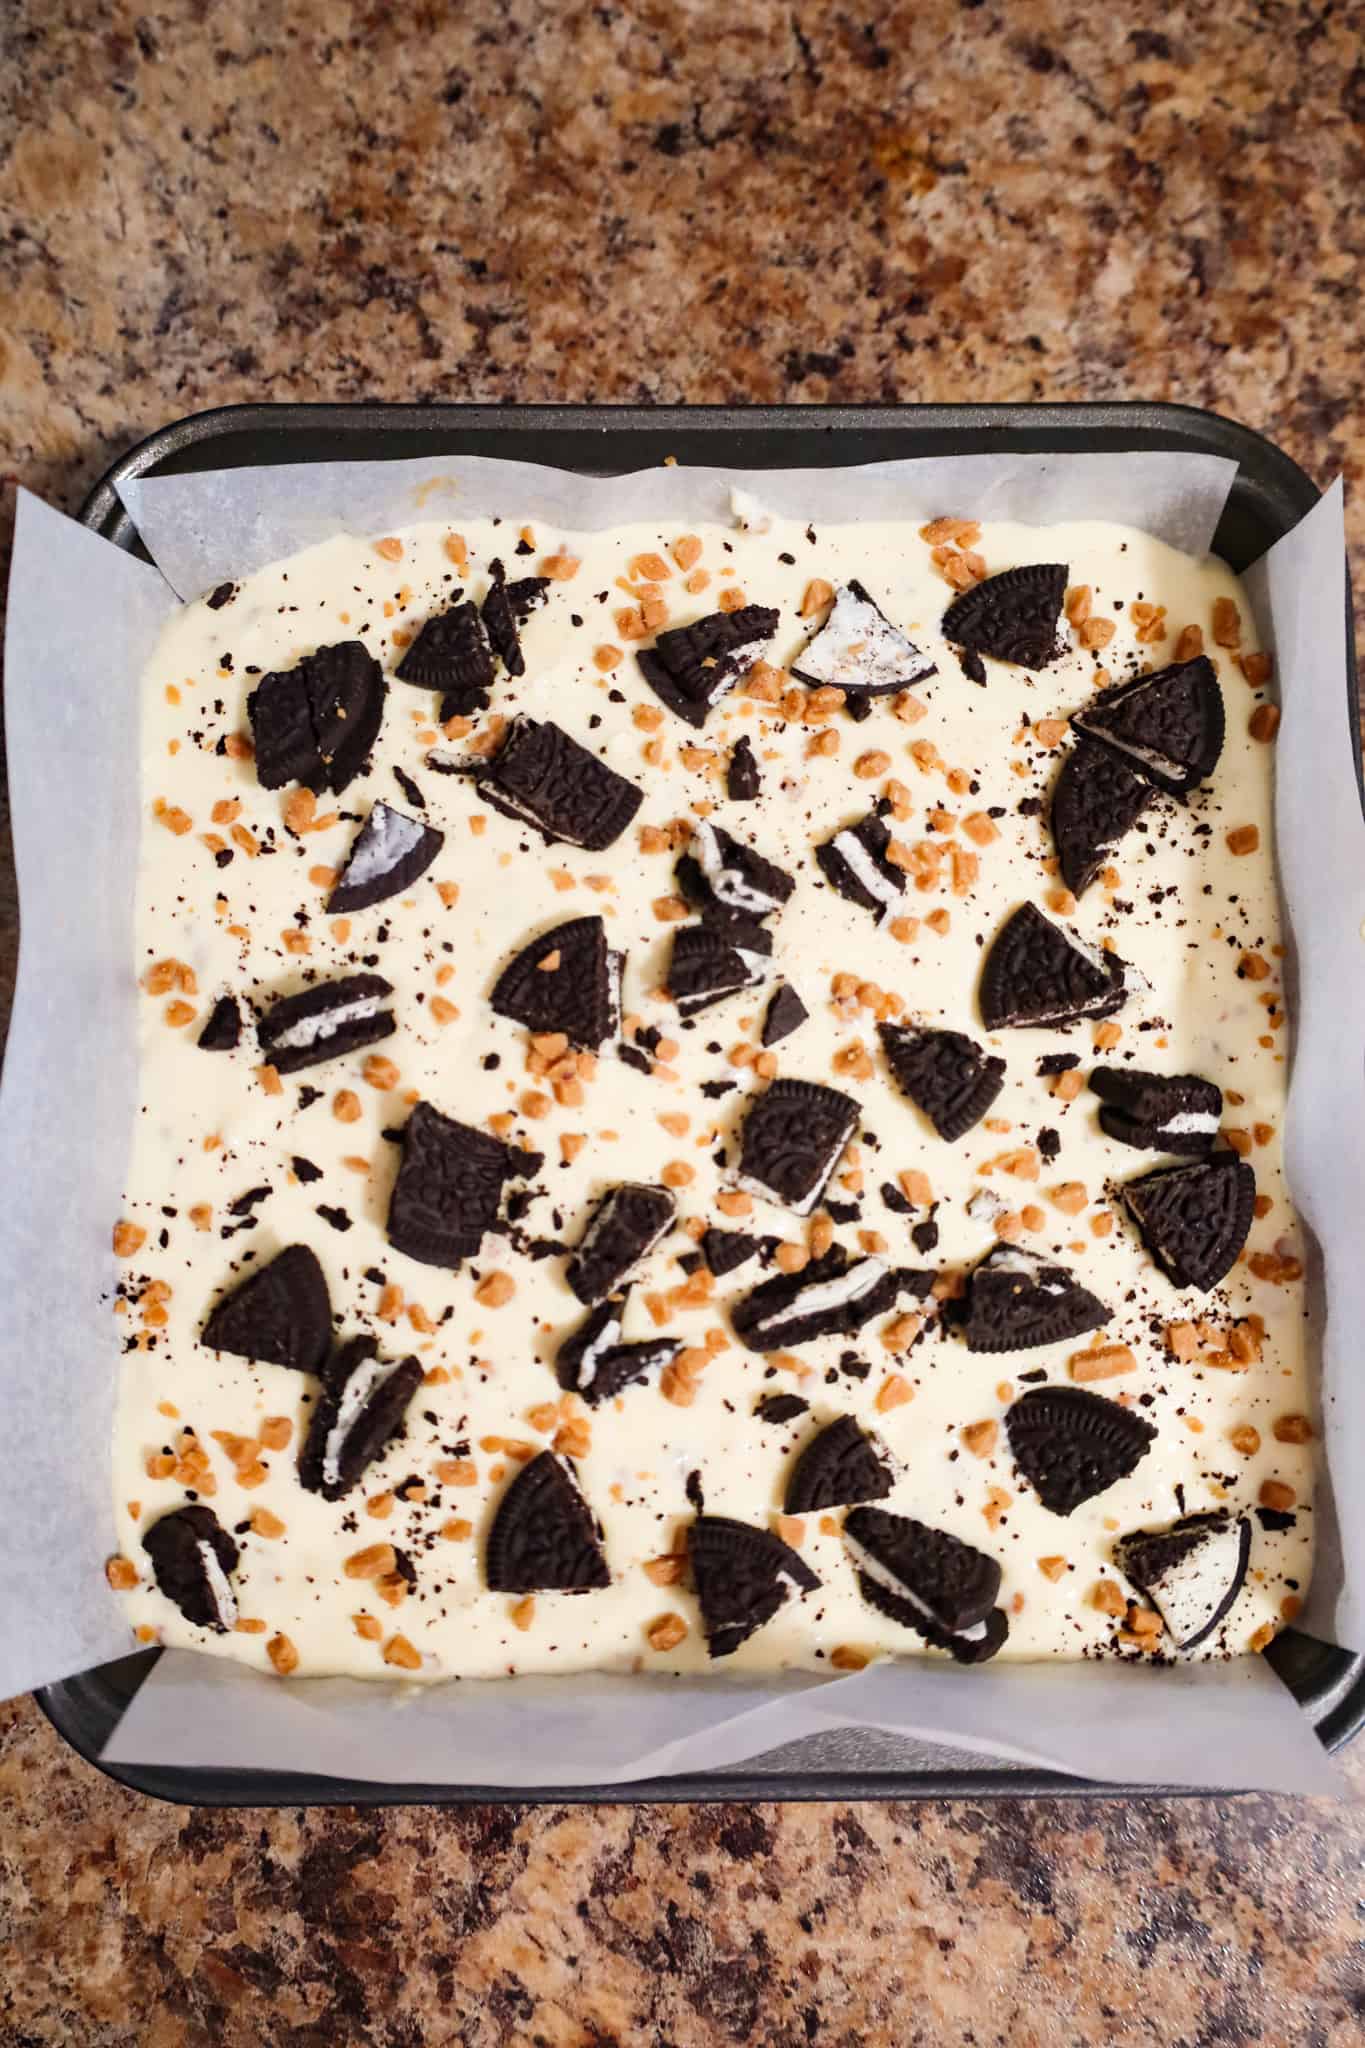 crumbled oreos and toffee bits on top of cheesecake mixture in a baking pan